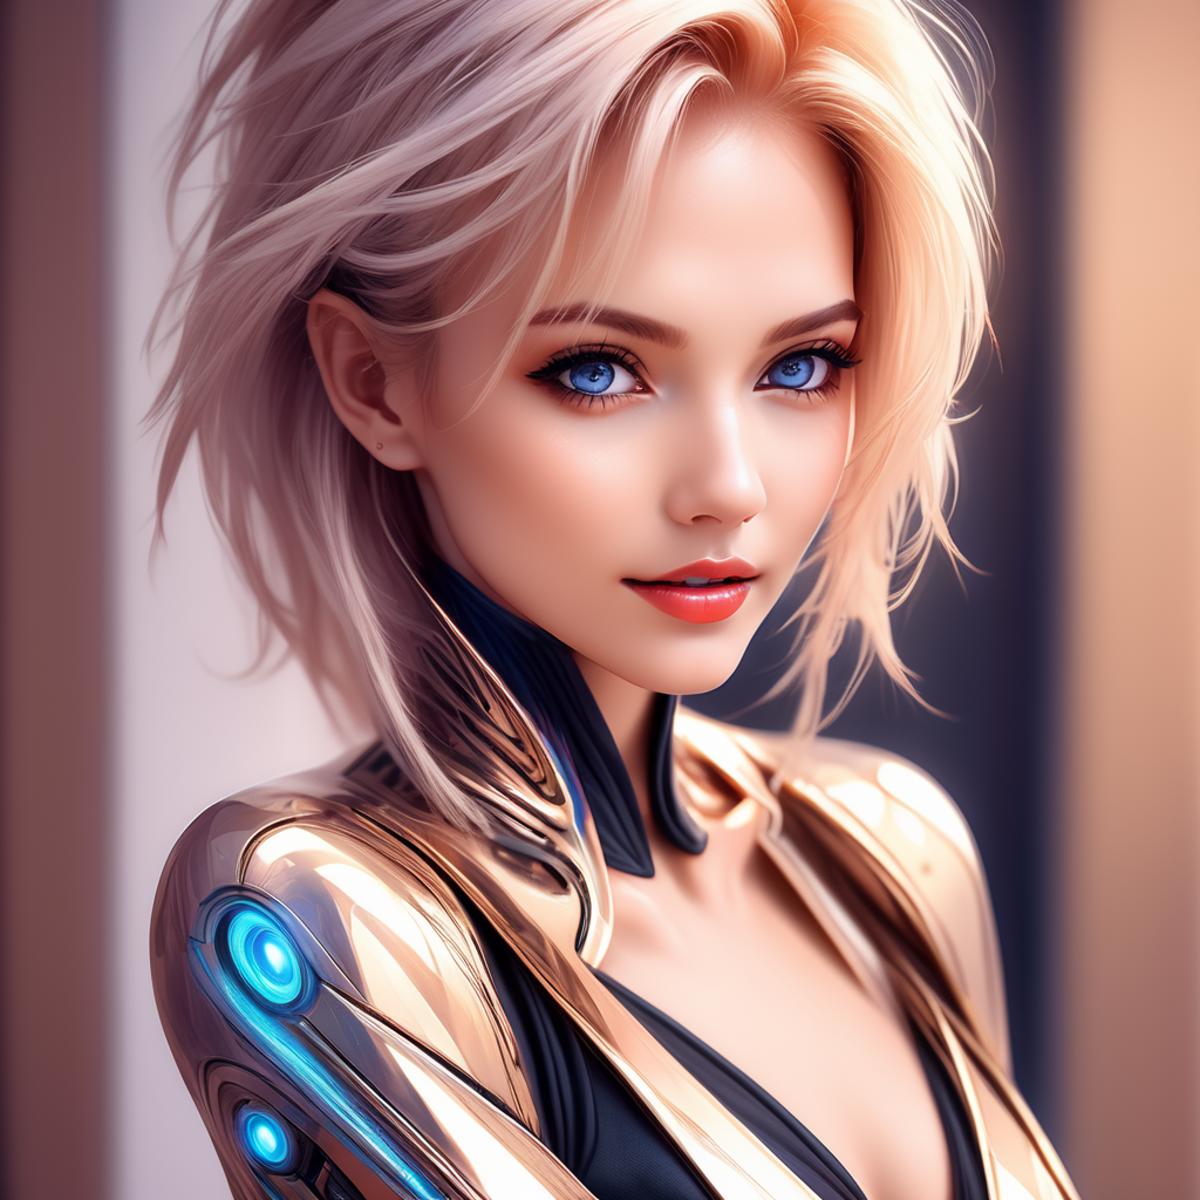 AI model image by chance762228